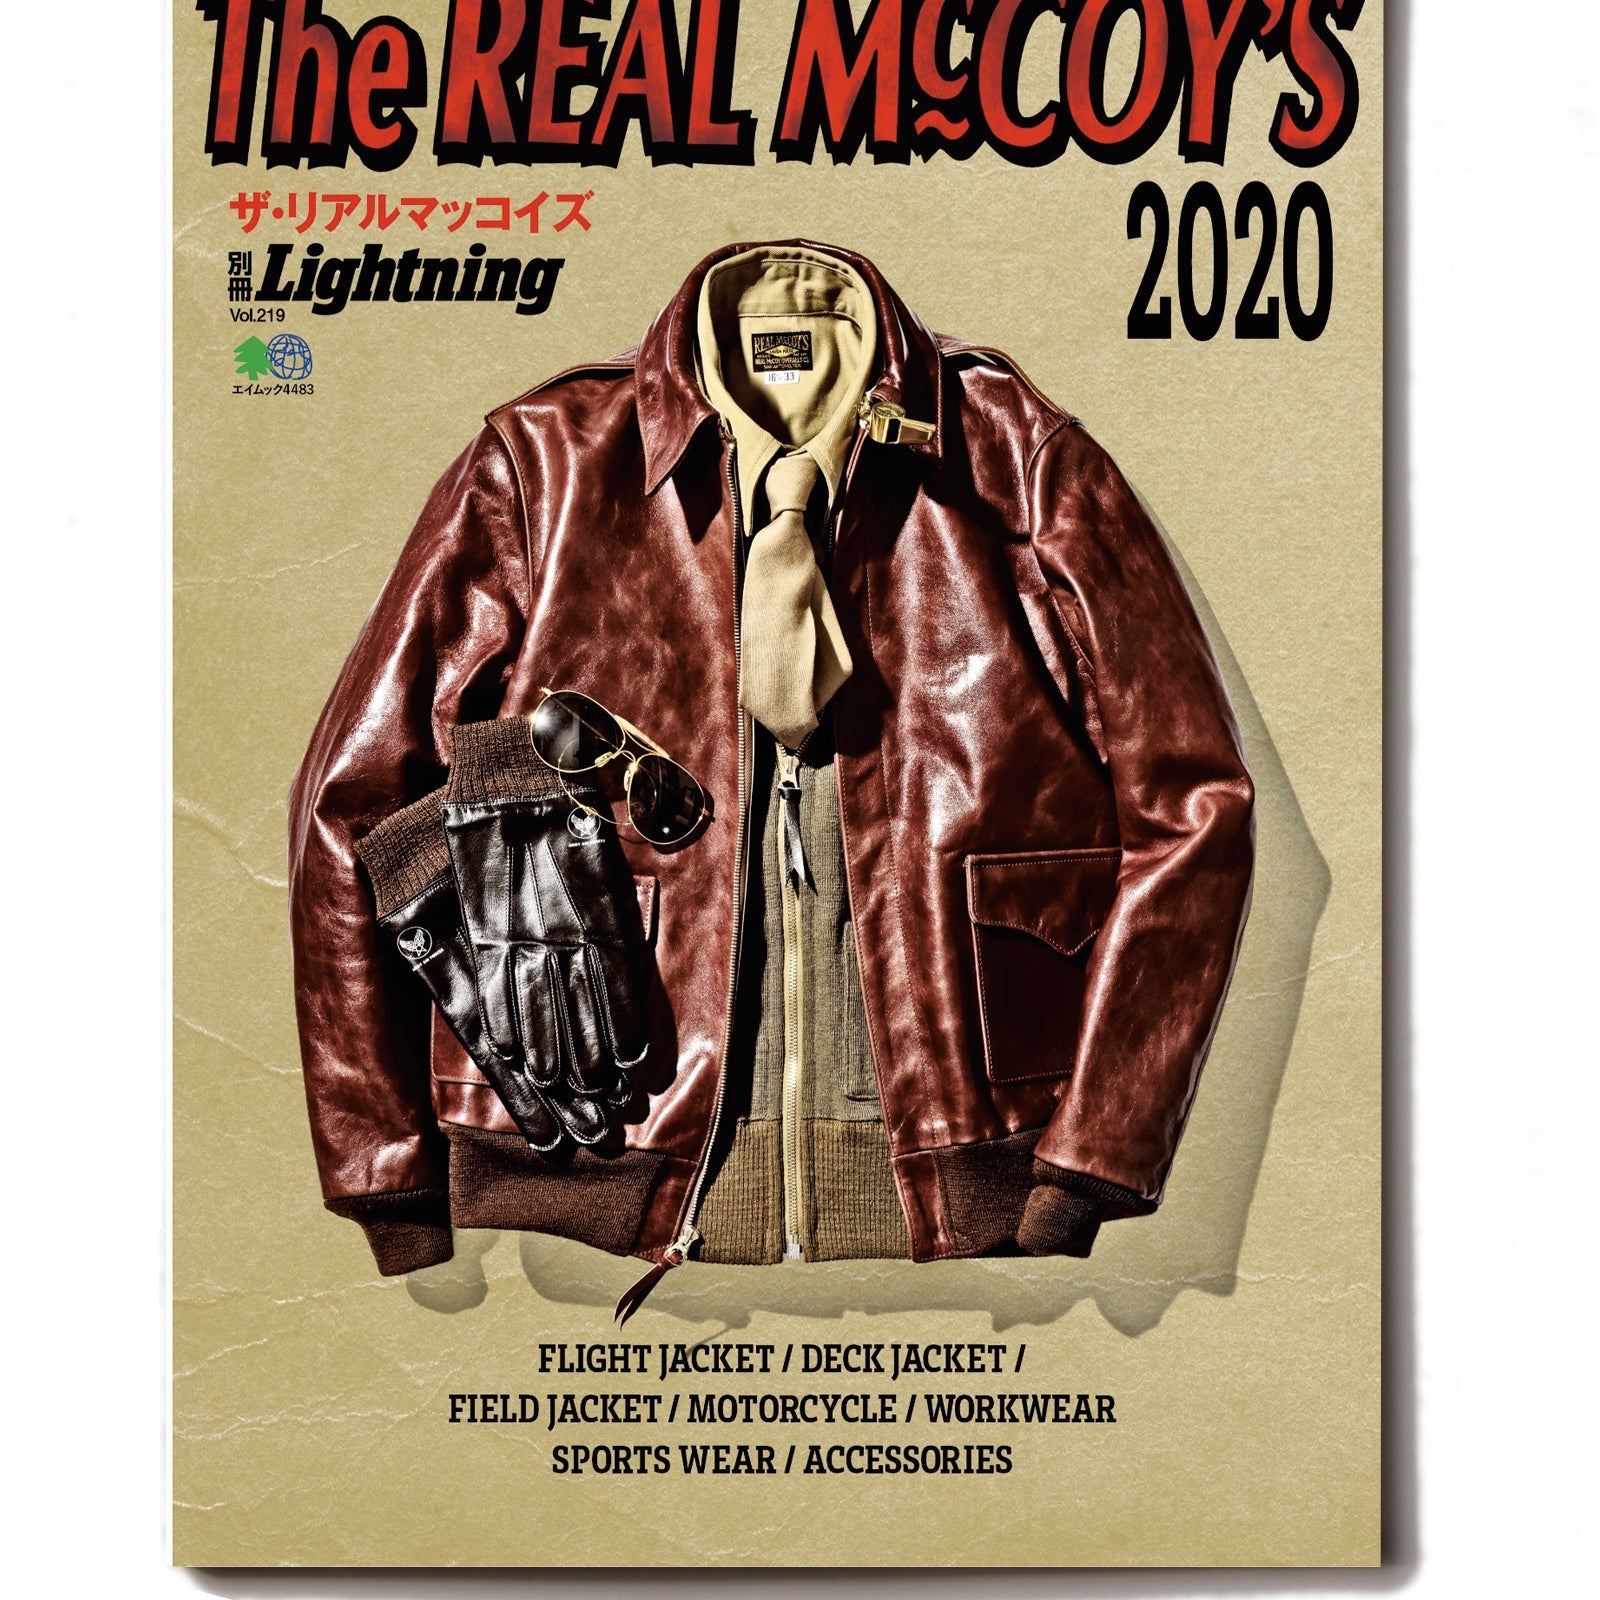 THE REAL McCOY'S BOOK 2020 – The Real McCoy's